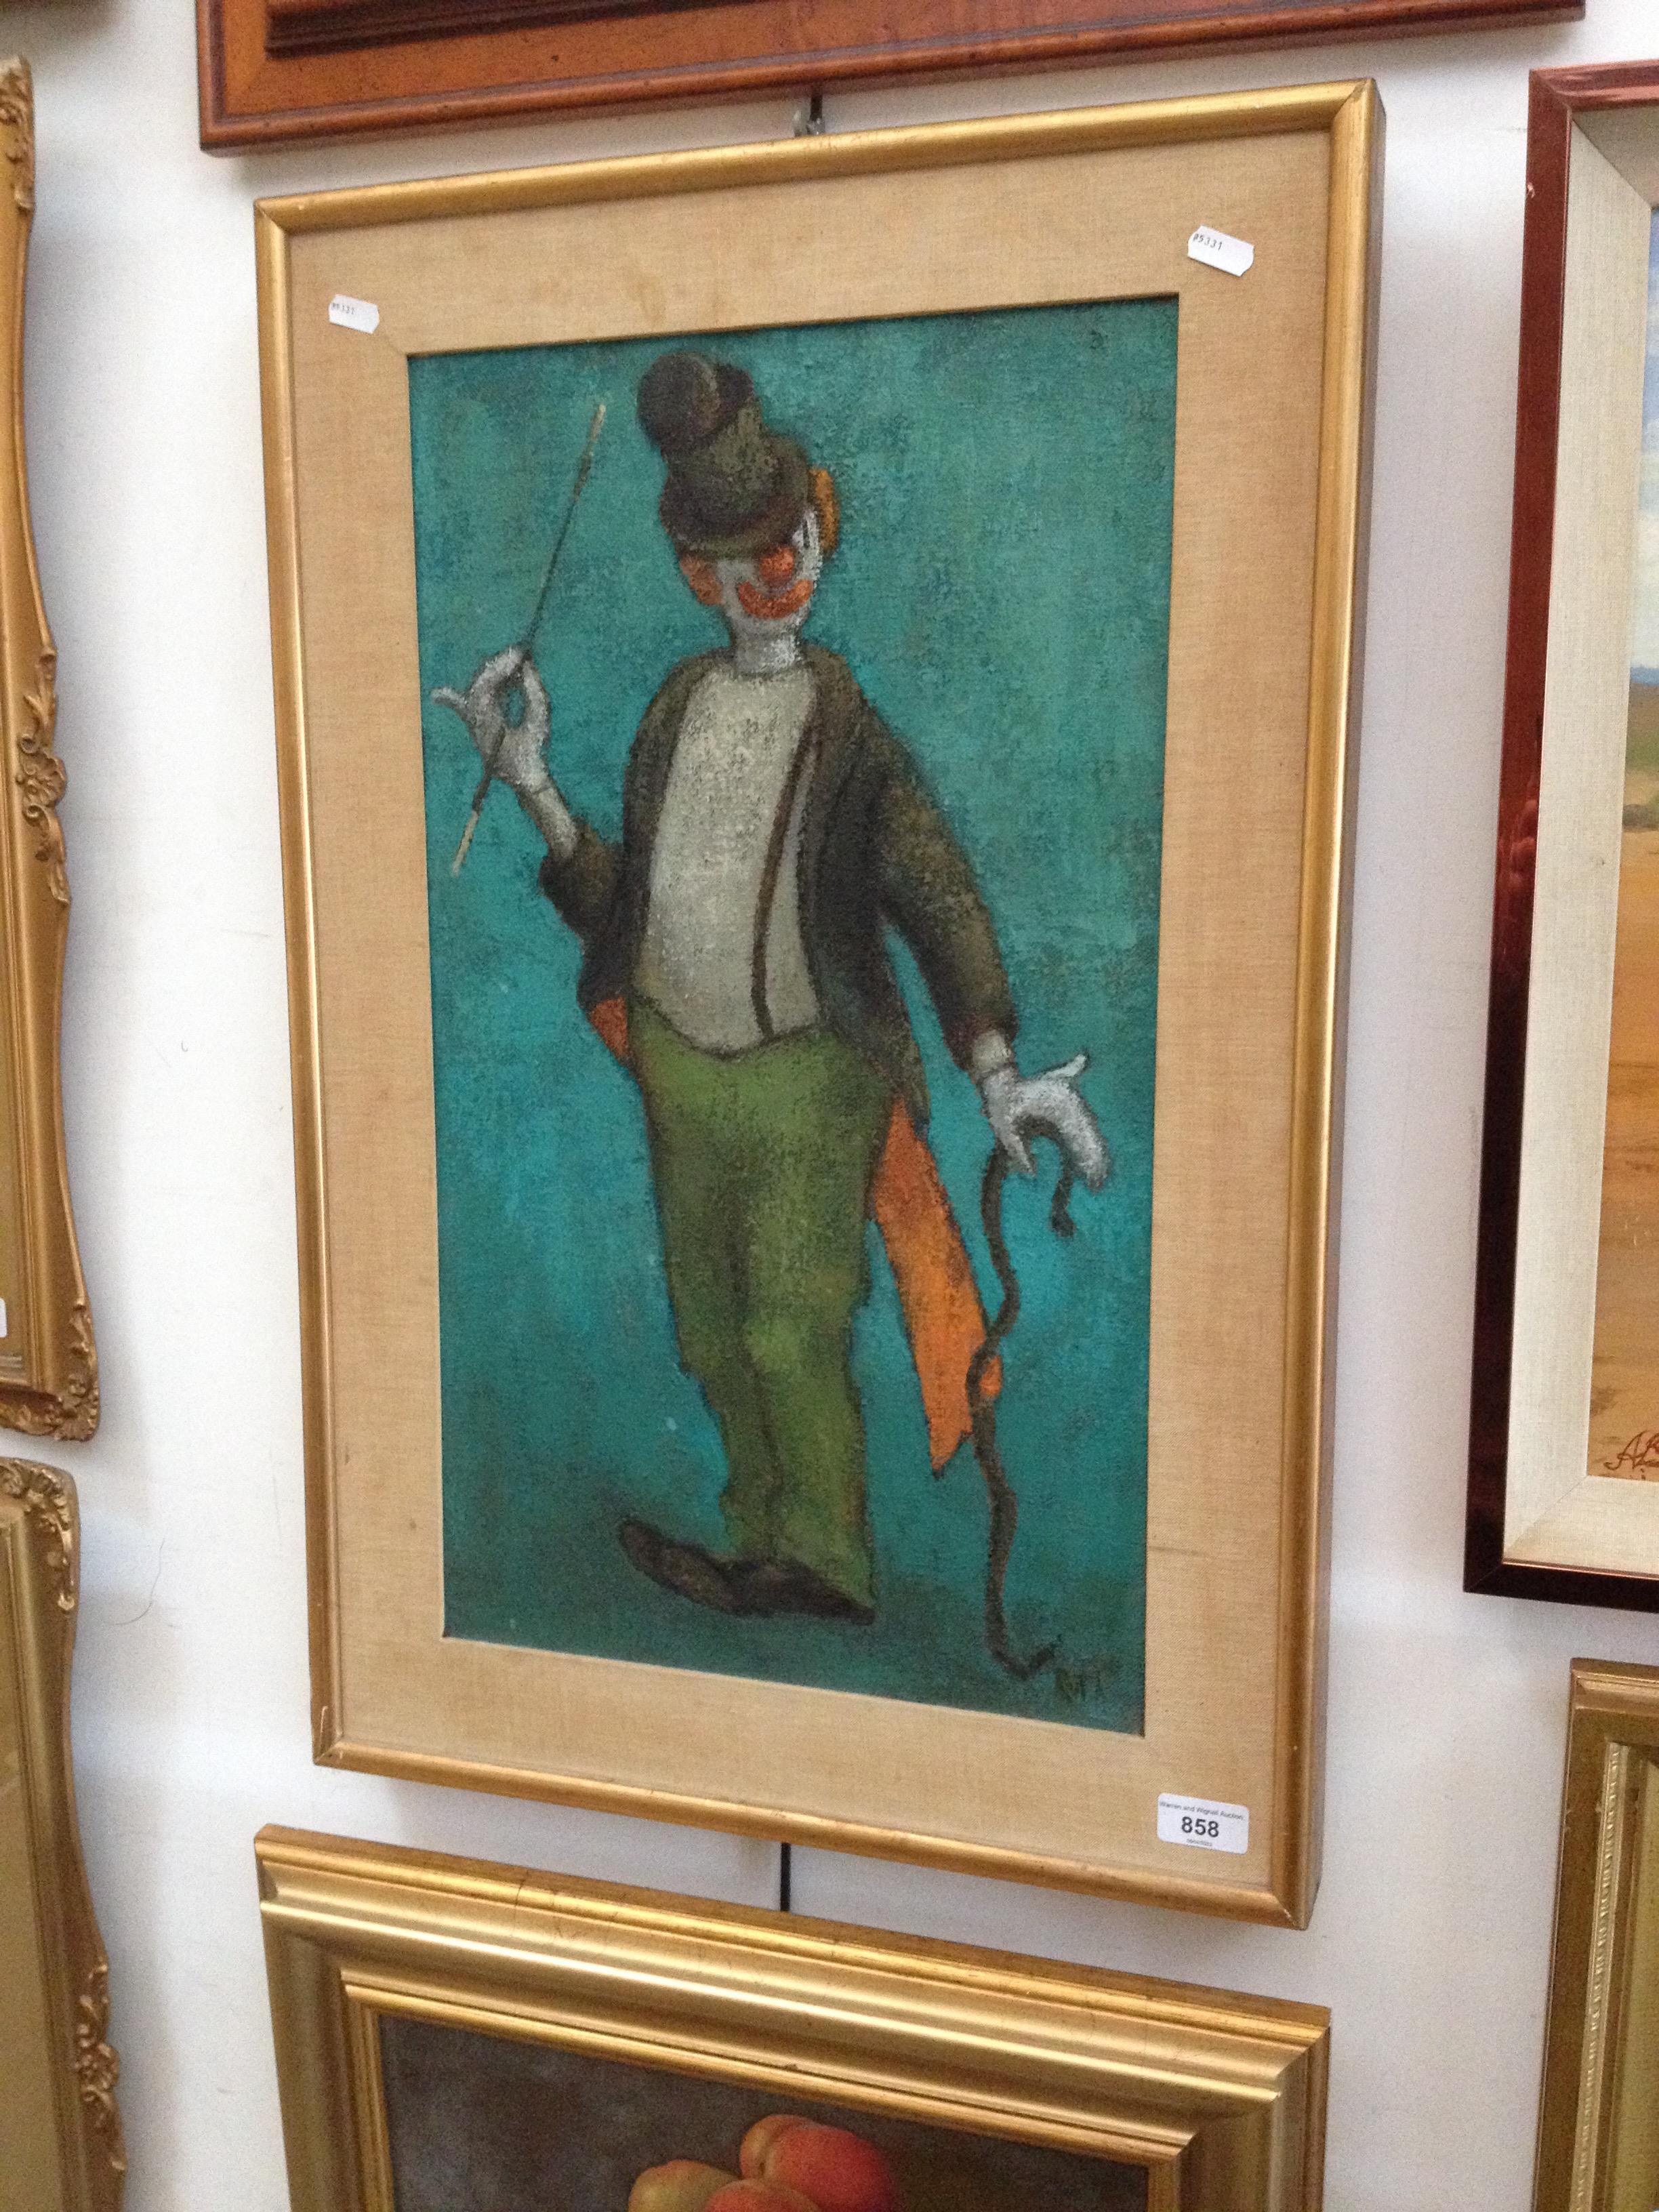 Mid 20th century, oil on canvas depicting a clown, 34cm x 59cm, signed 'Ruth' to lower right, framed